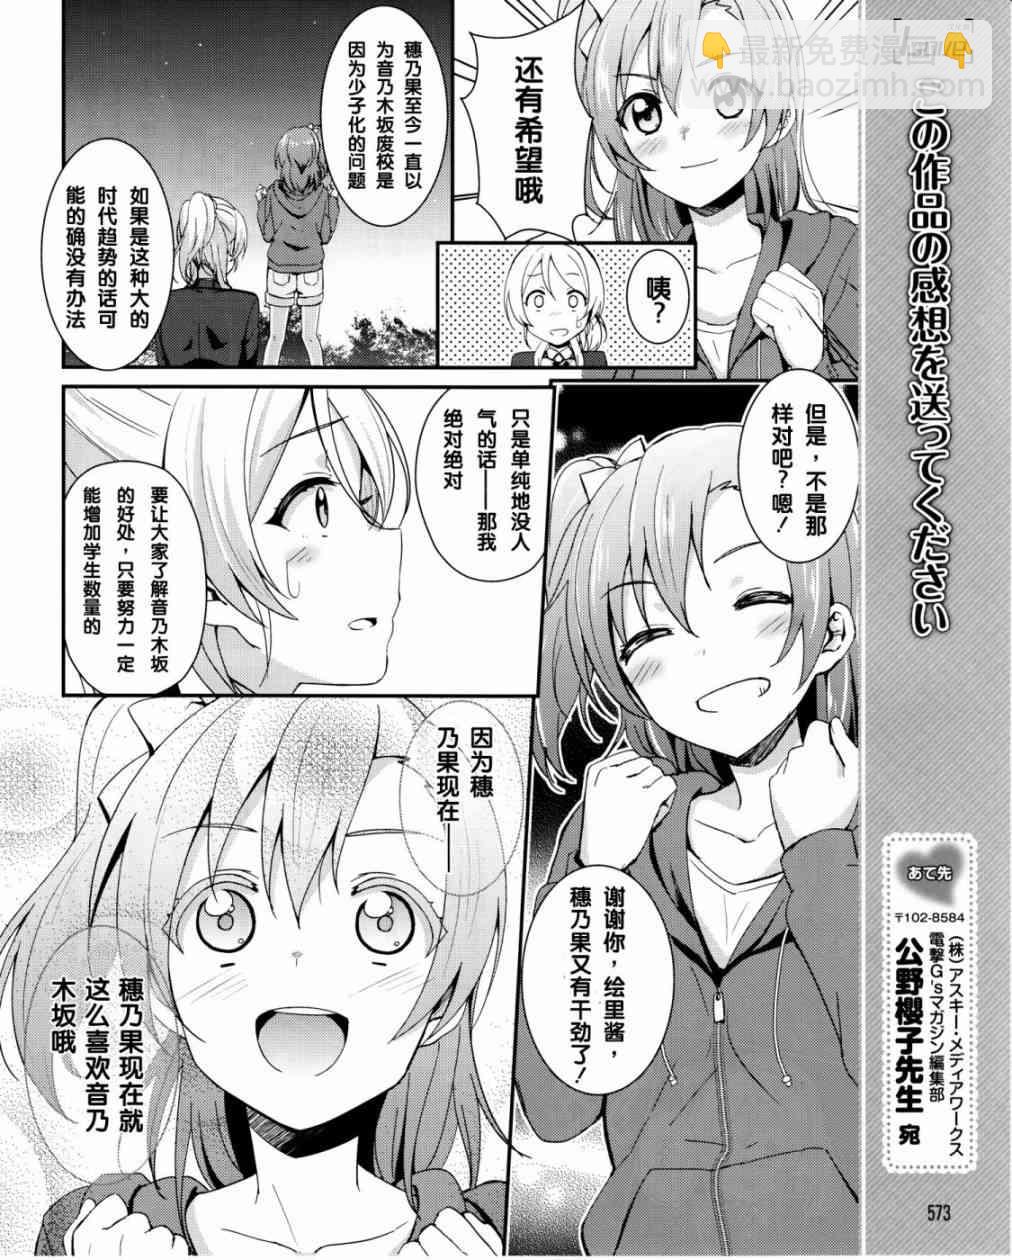 LoveLive - 16話 - 3